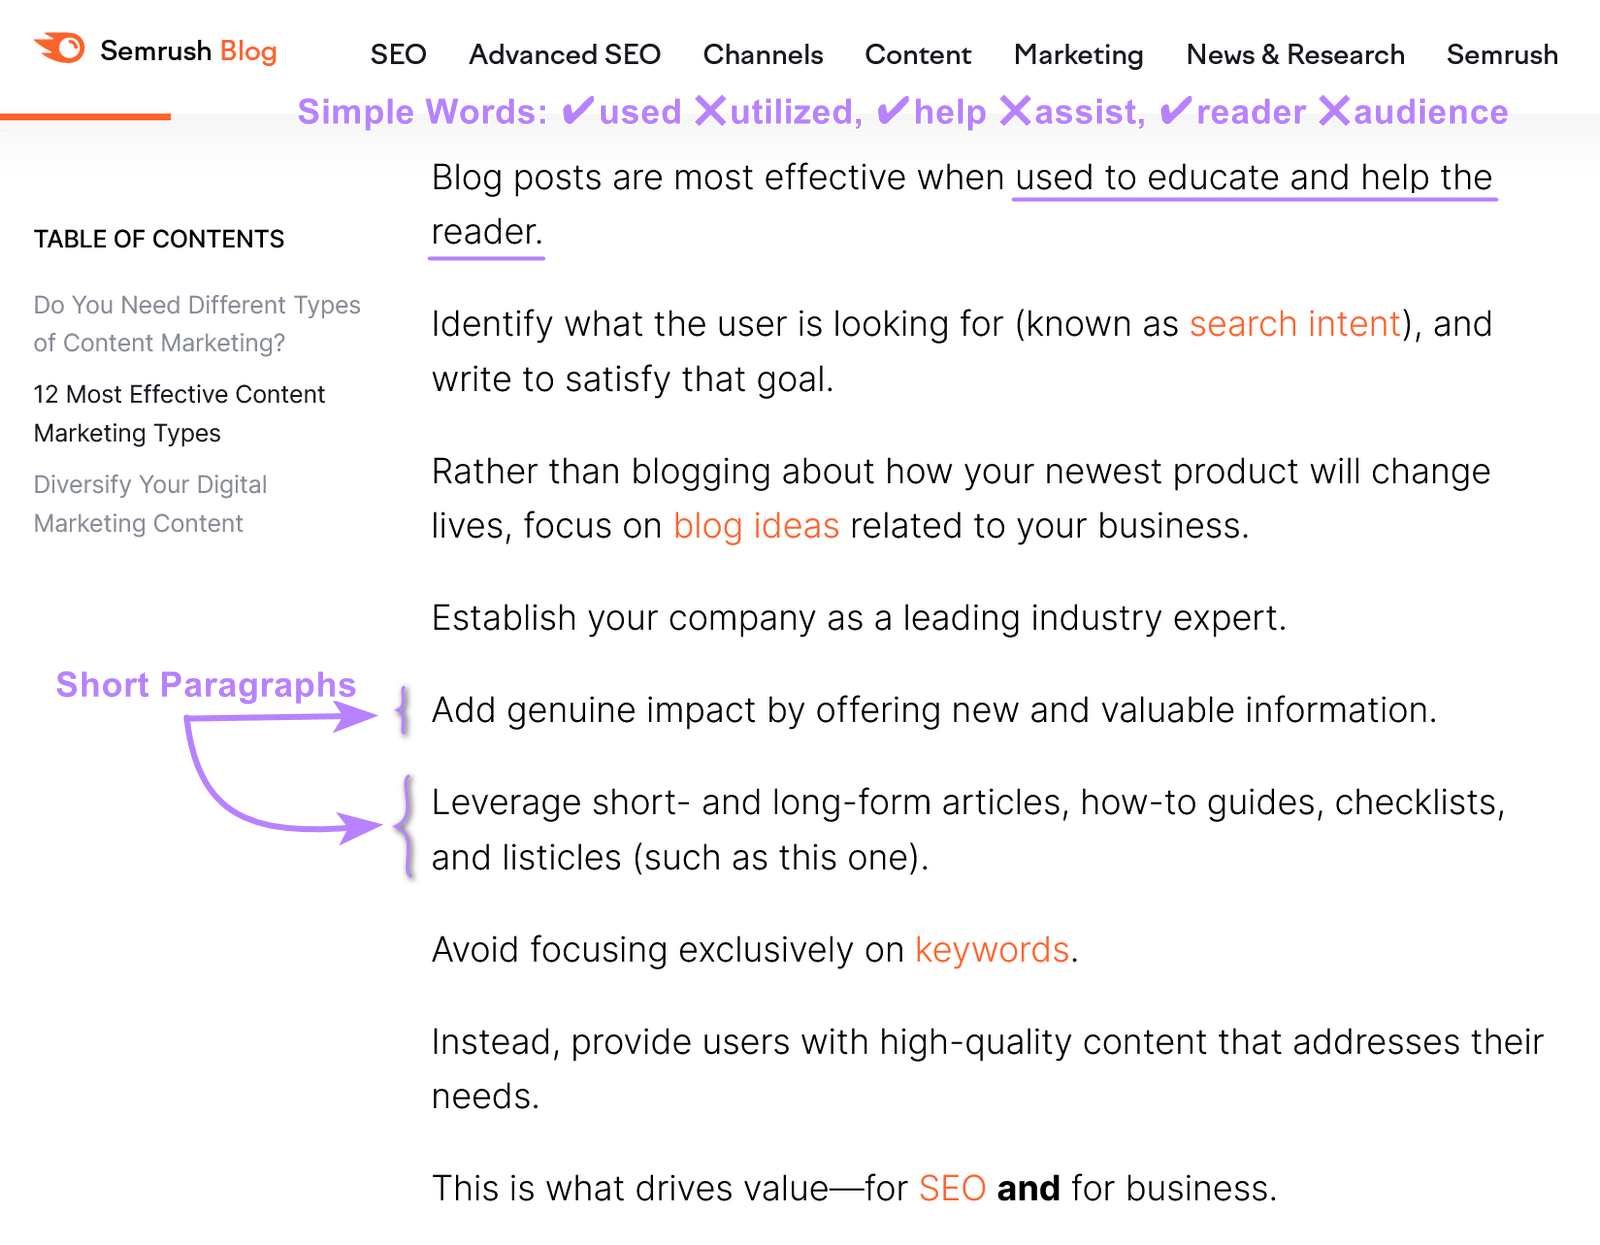 example of body of text from the Semrush blog illustrating simplicity and short paragraphs